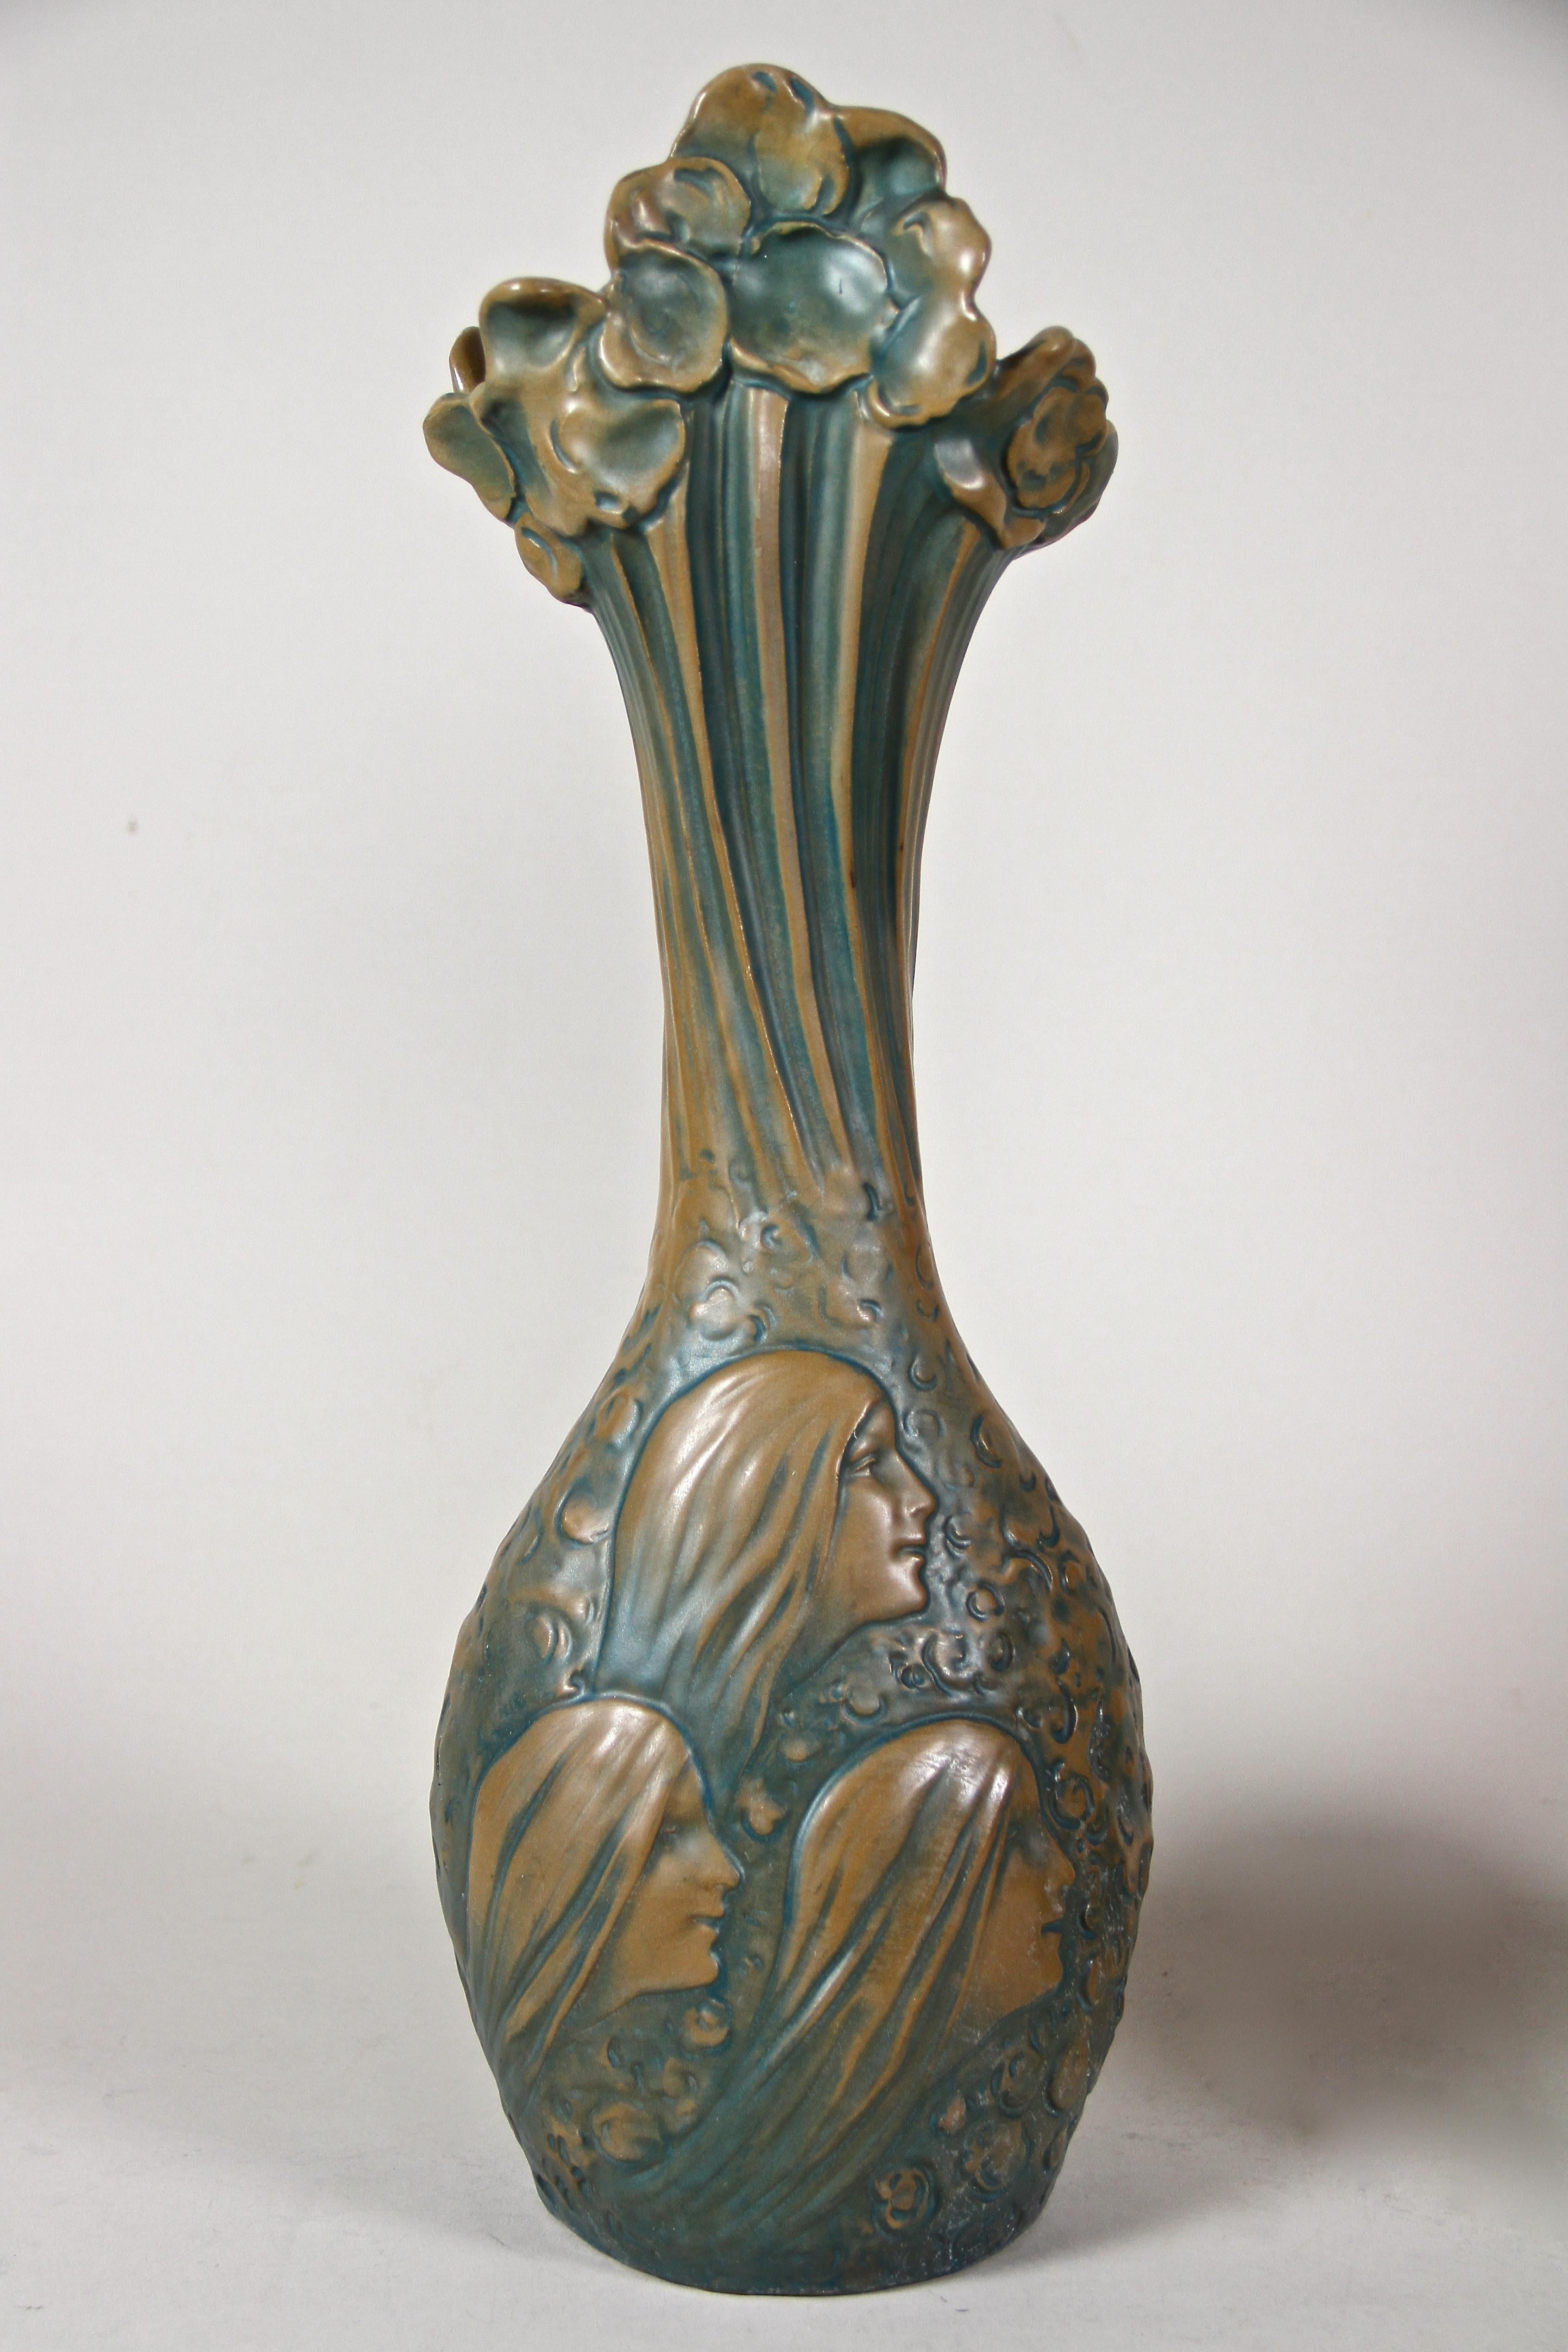 Very rare pair of early Art Nouveau Majolica Vases made by the renowed majolica manufactory of Bernhard Bloch/ Eichwald at the beginning of the 20th century in Bohemia. Real beautiful pieces of majolica art with amazing organic lines and dreamlike